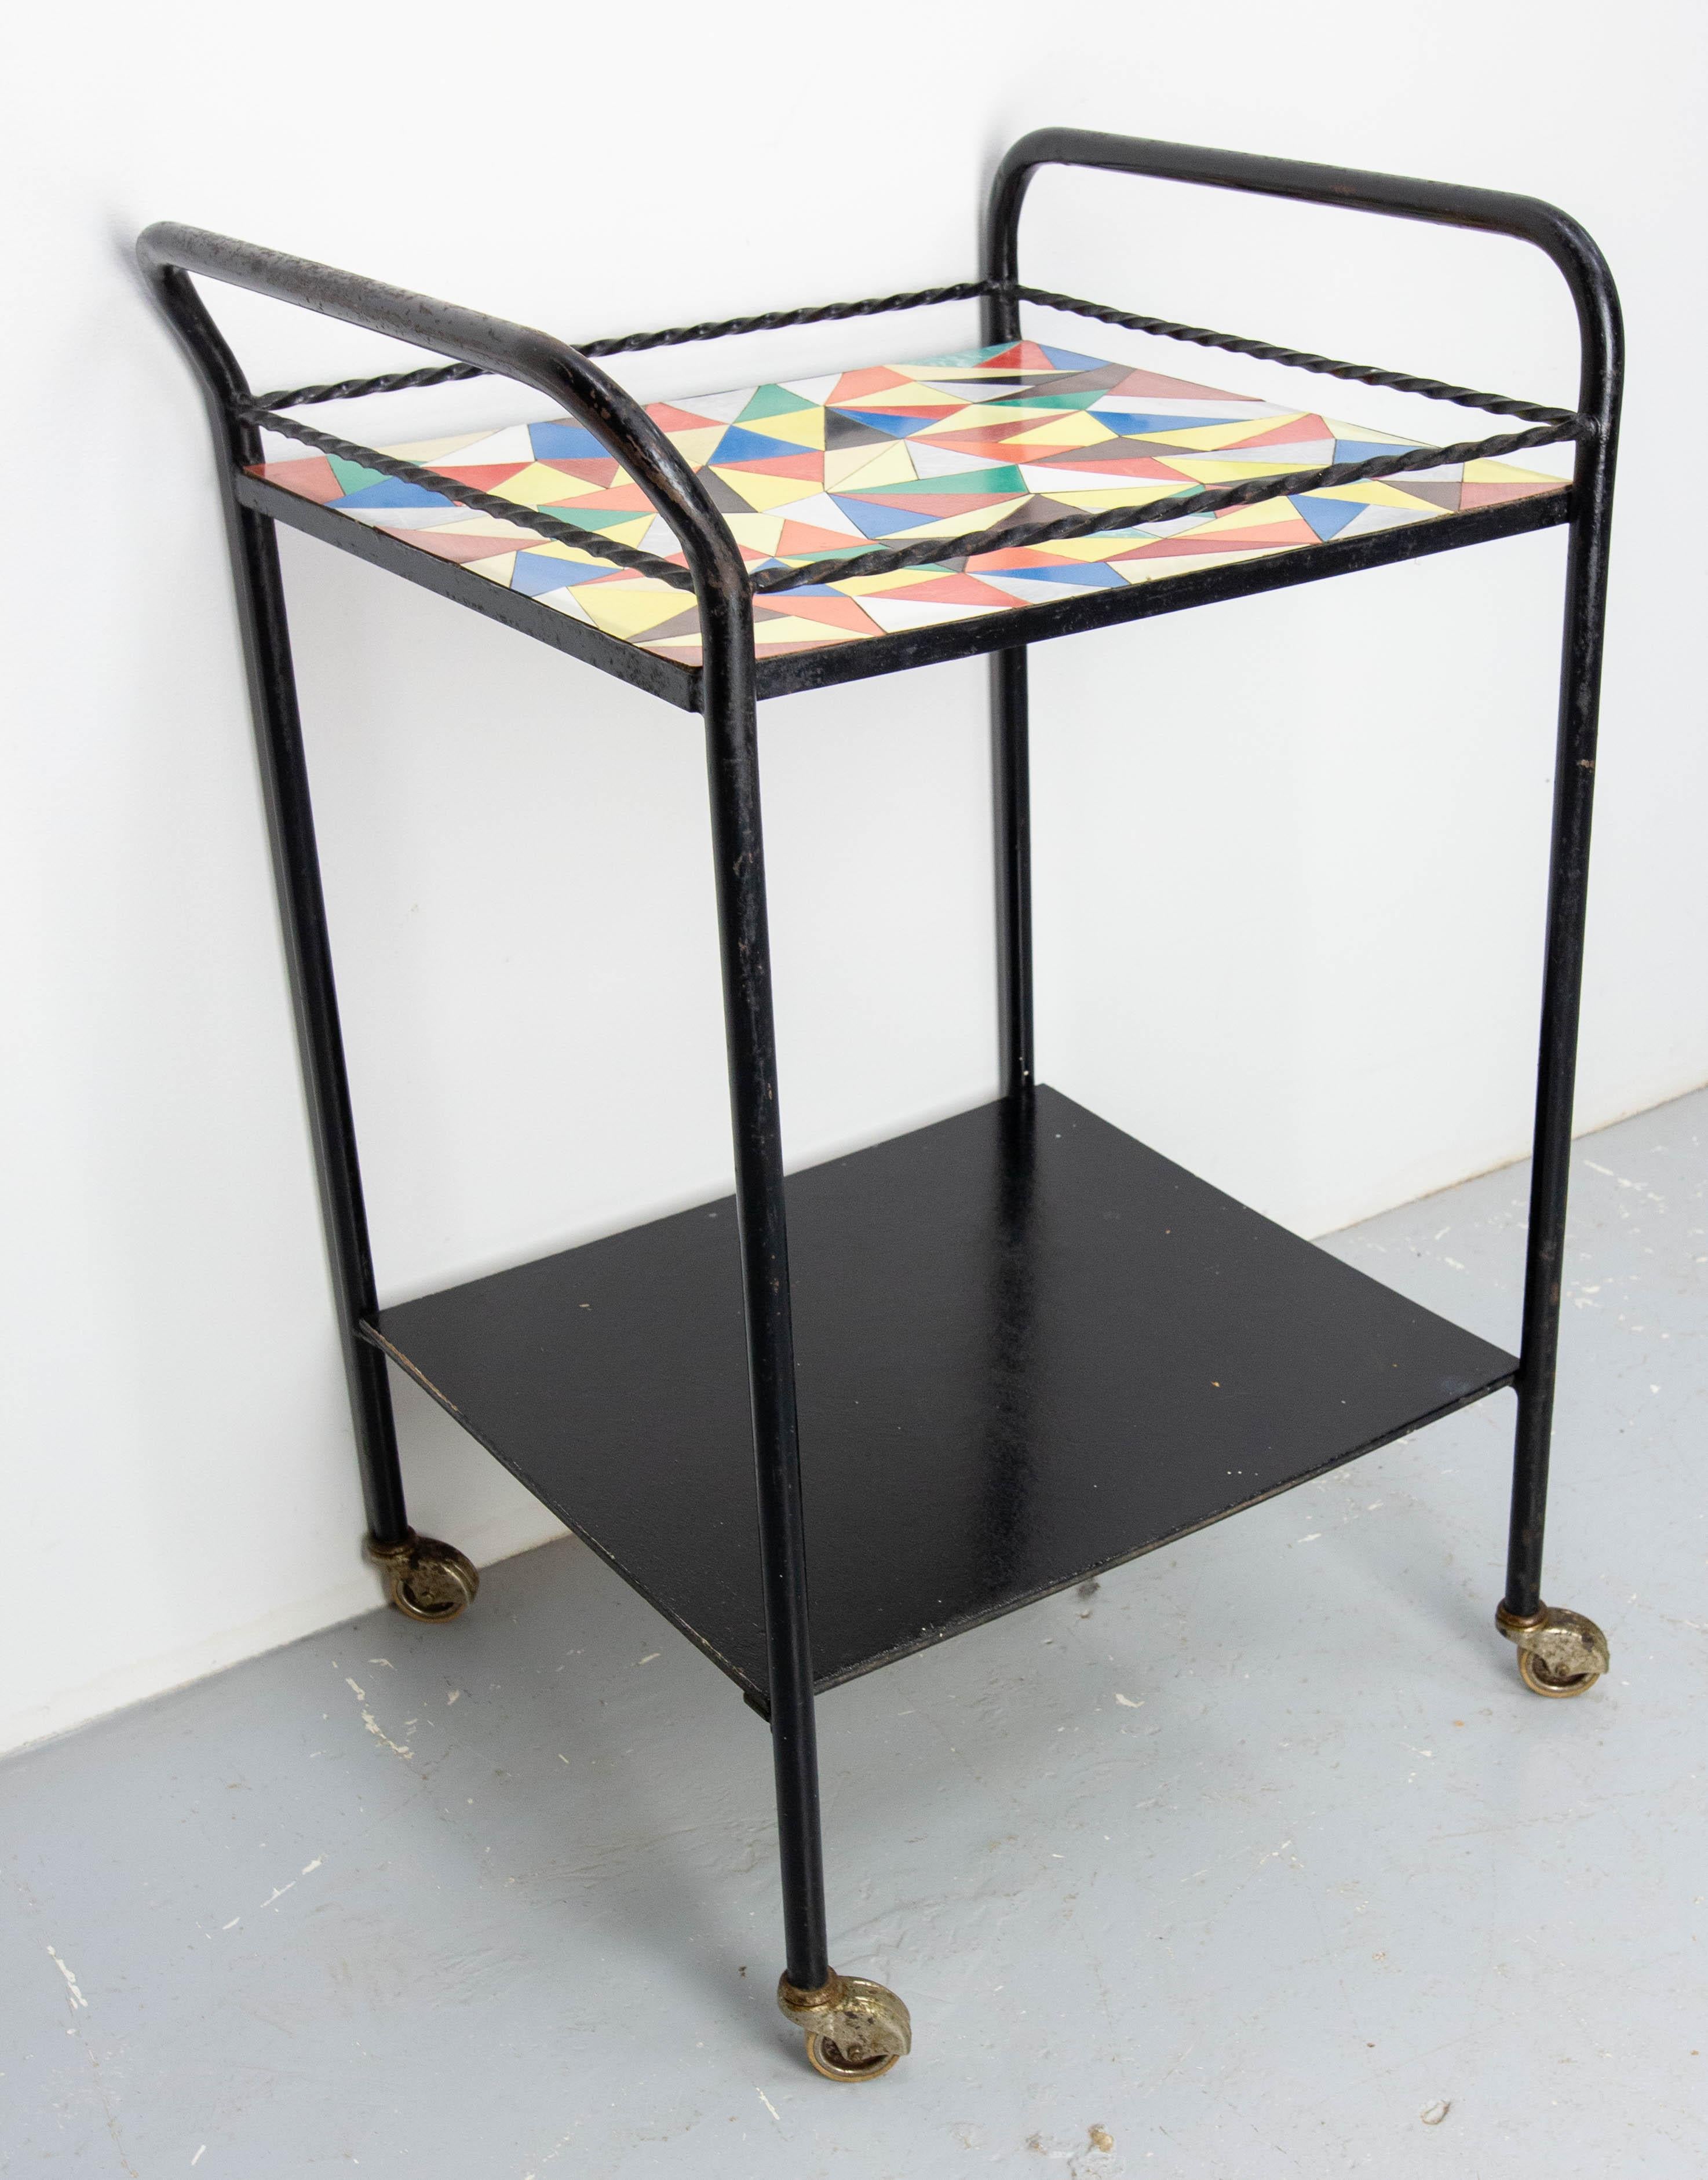 Mid-Century Modern French Iron & Ceramic Table Trolley Console Desserte Side Table with Wheels 1960 For Sale